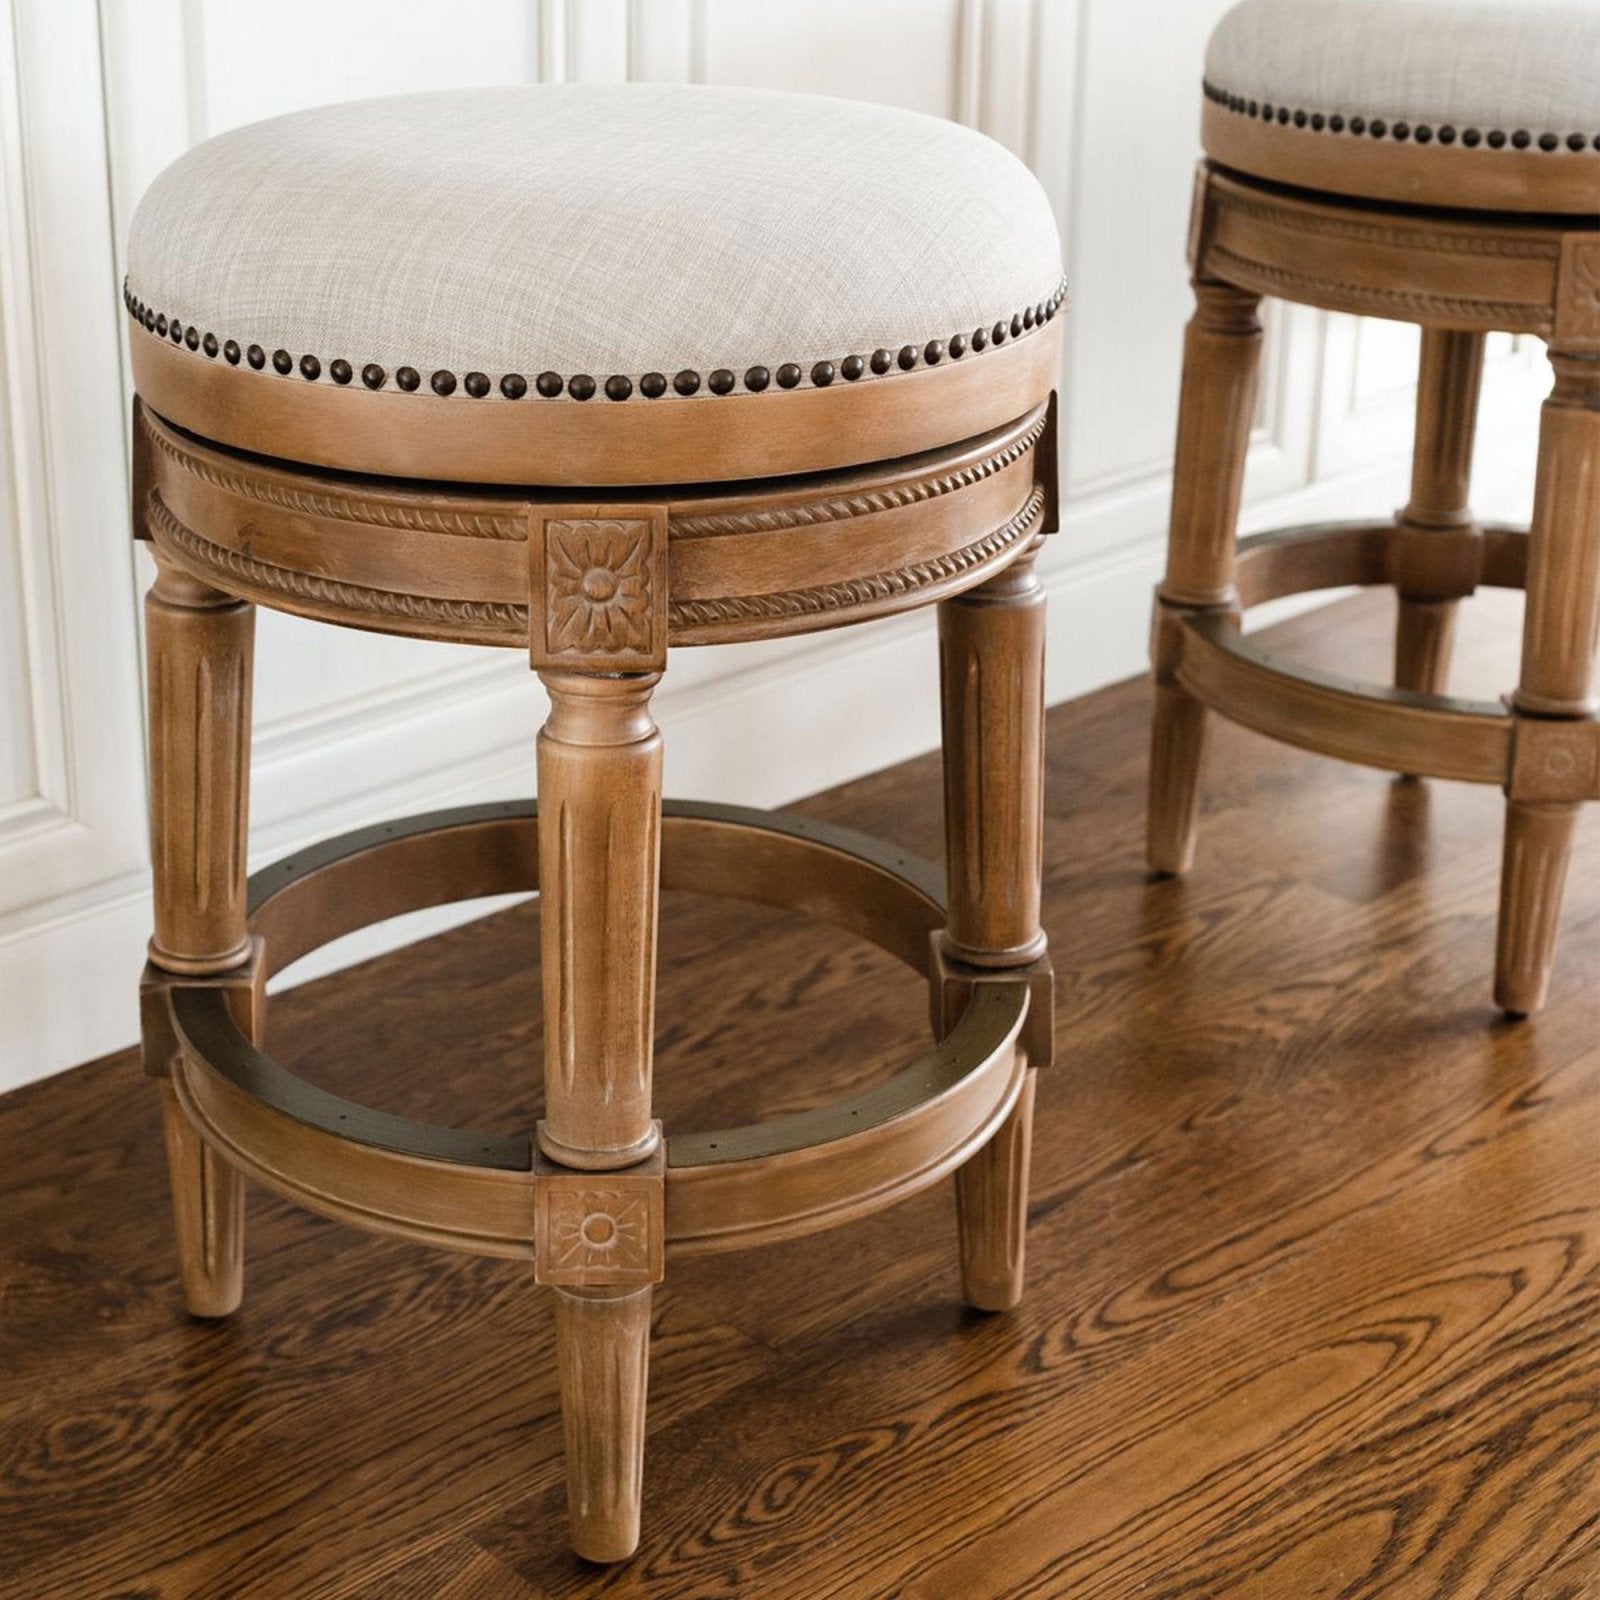 Pullman Backless Bar Stool in Weathered Oak Finish with Sand Color Fabric Upholstery in Stools by Maven Lane